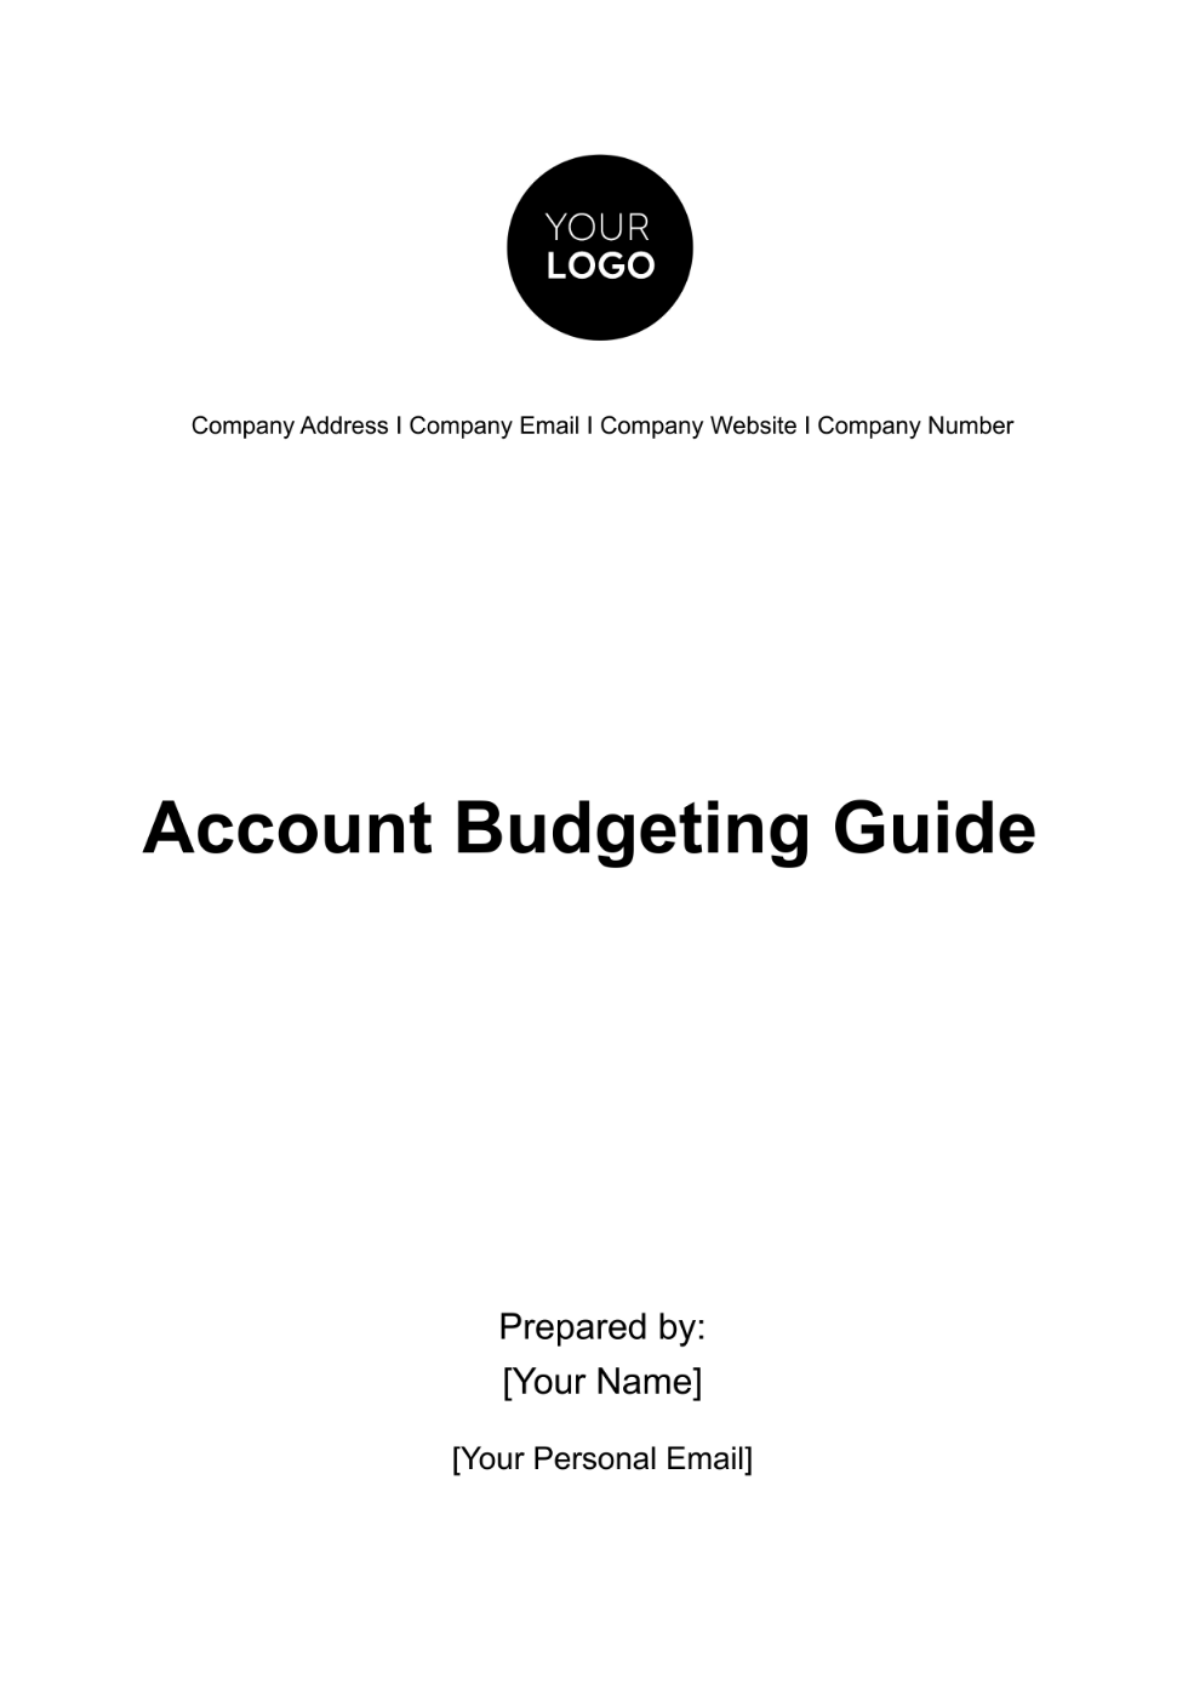 Account Budgeting Guide Template